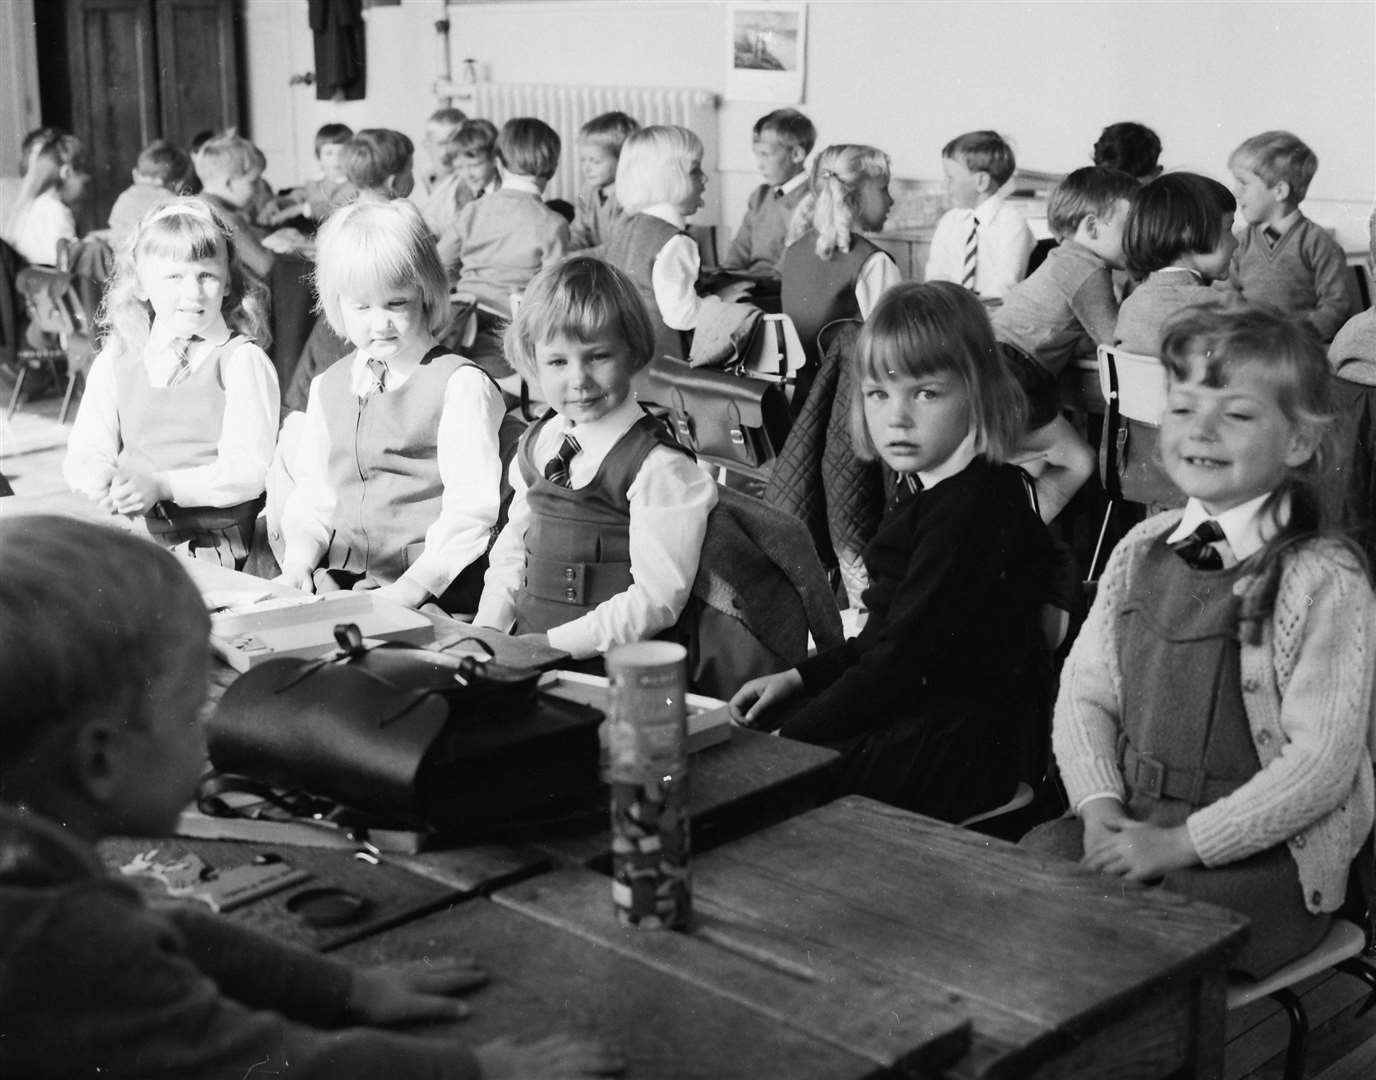 It's first day at school for these new P1s back in the early 1970s.